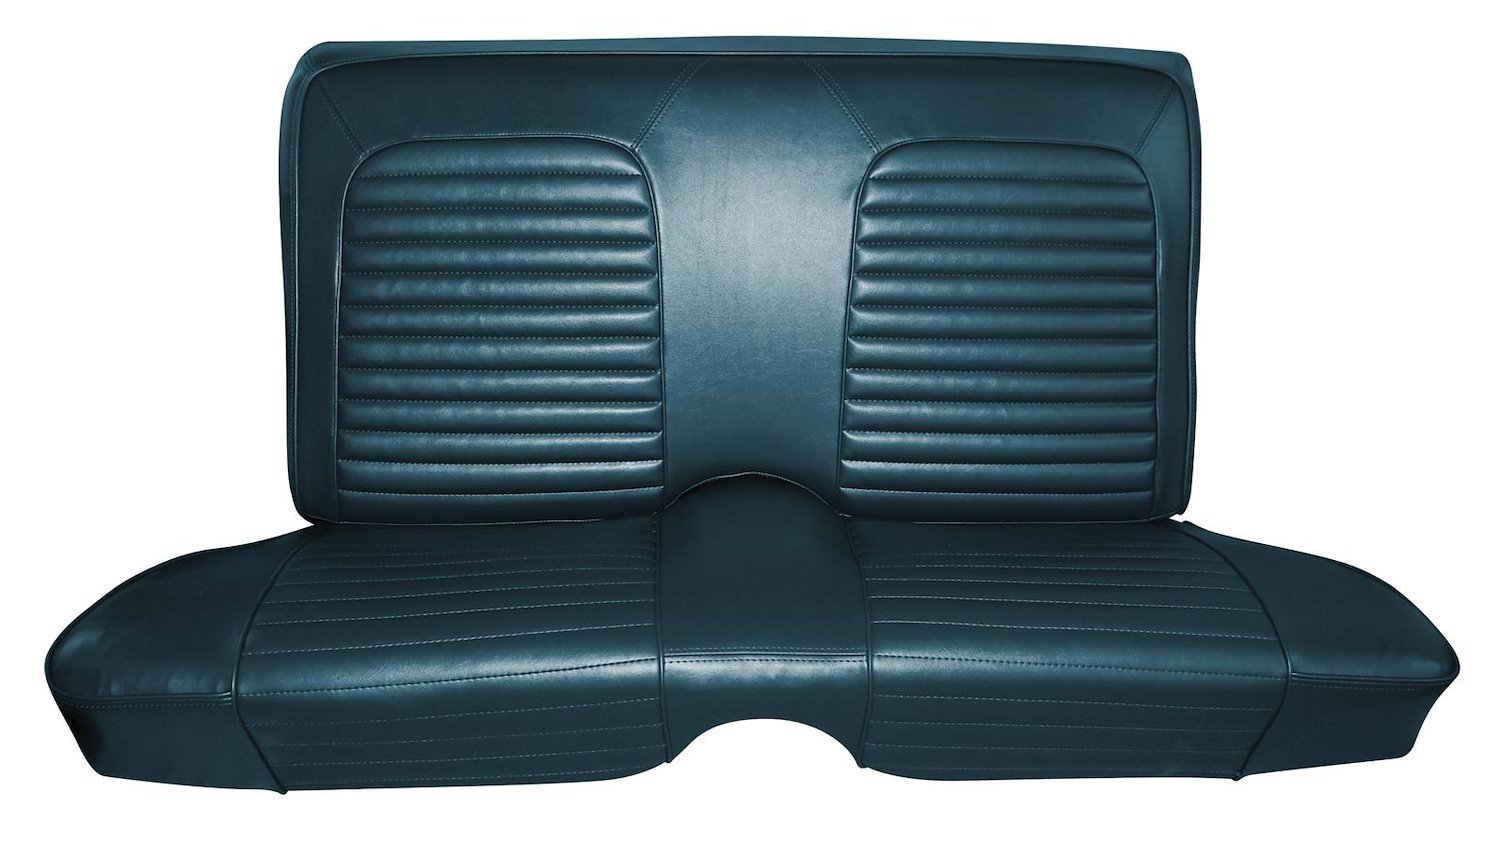 1969 Chevrolet Chevelle Malibu and Super Sport Coupe Interior Rear Bench Seat Upholstery Set